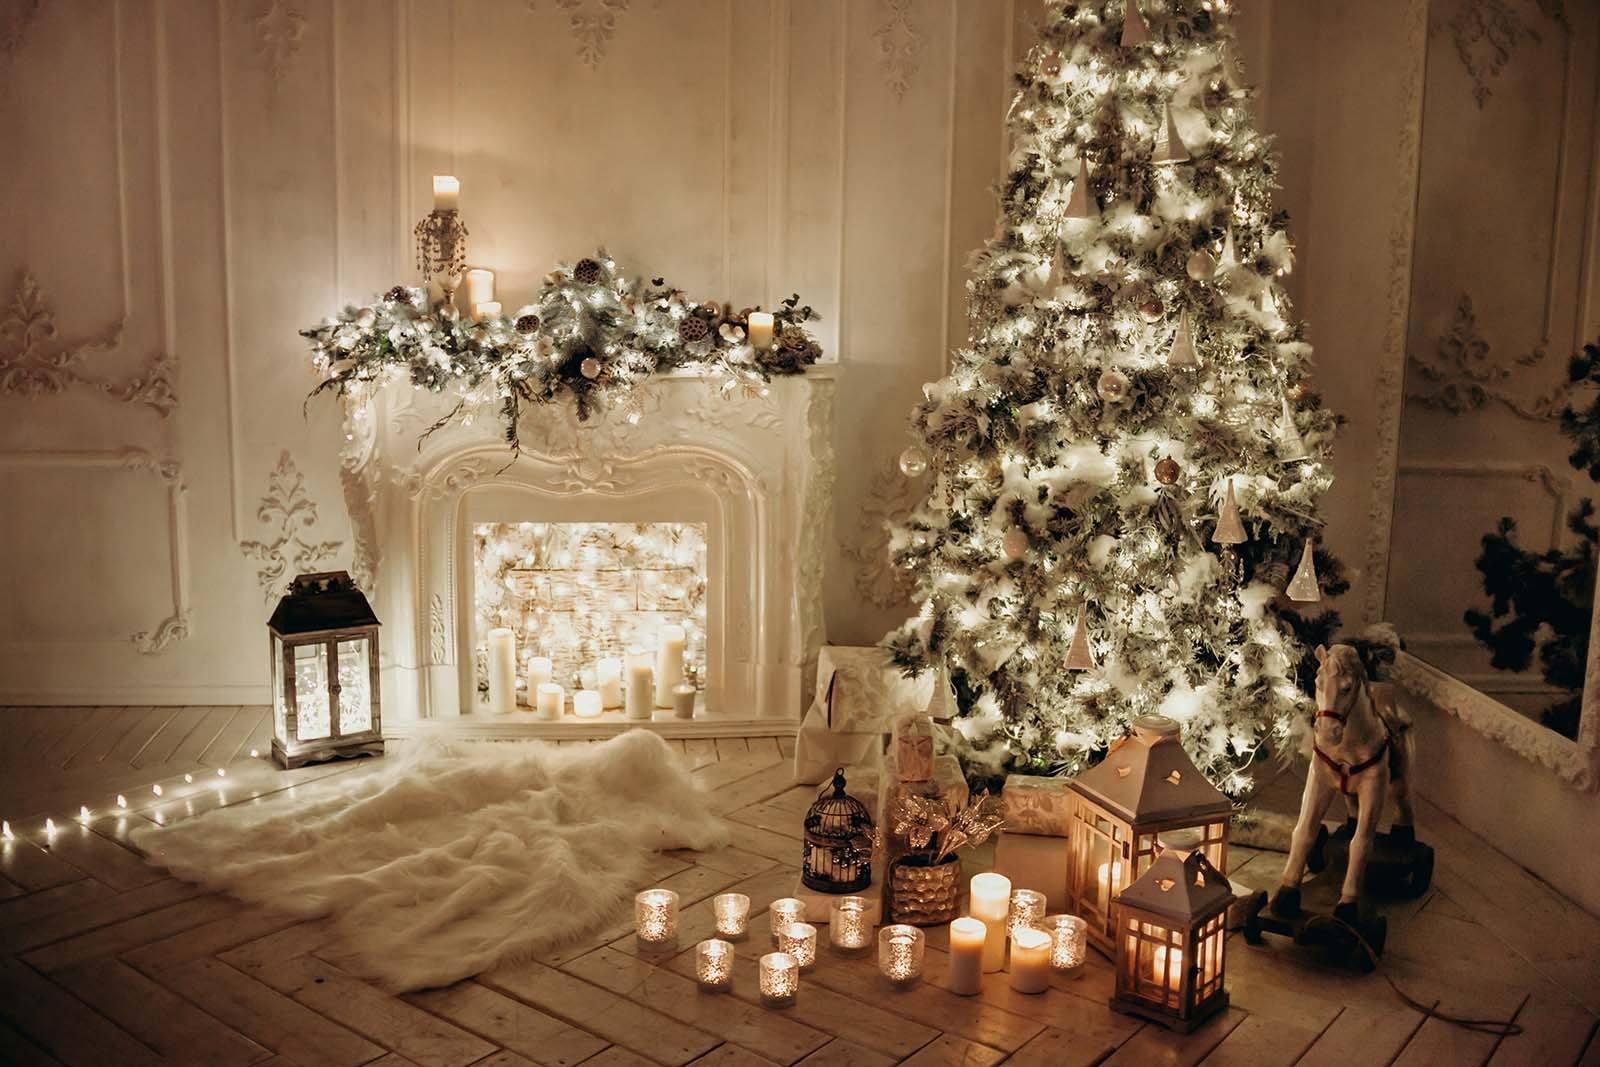 Classical Interior White Room With Decorated Fireplace Christmas Tree Photography Backdrop J-0612 Shopbackdrop